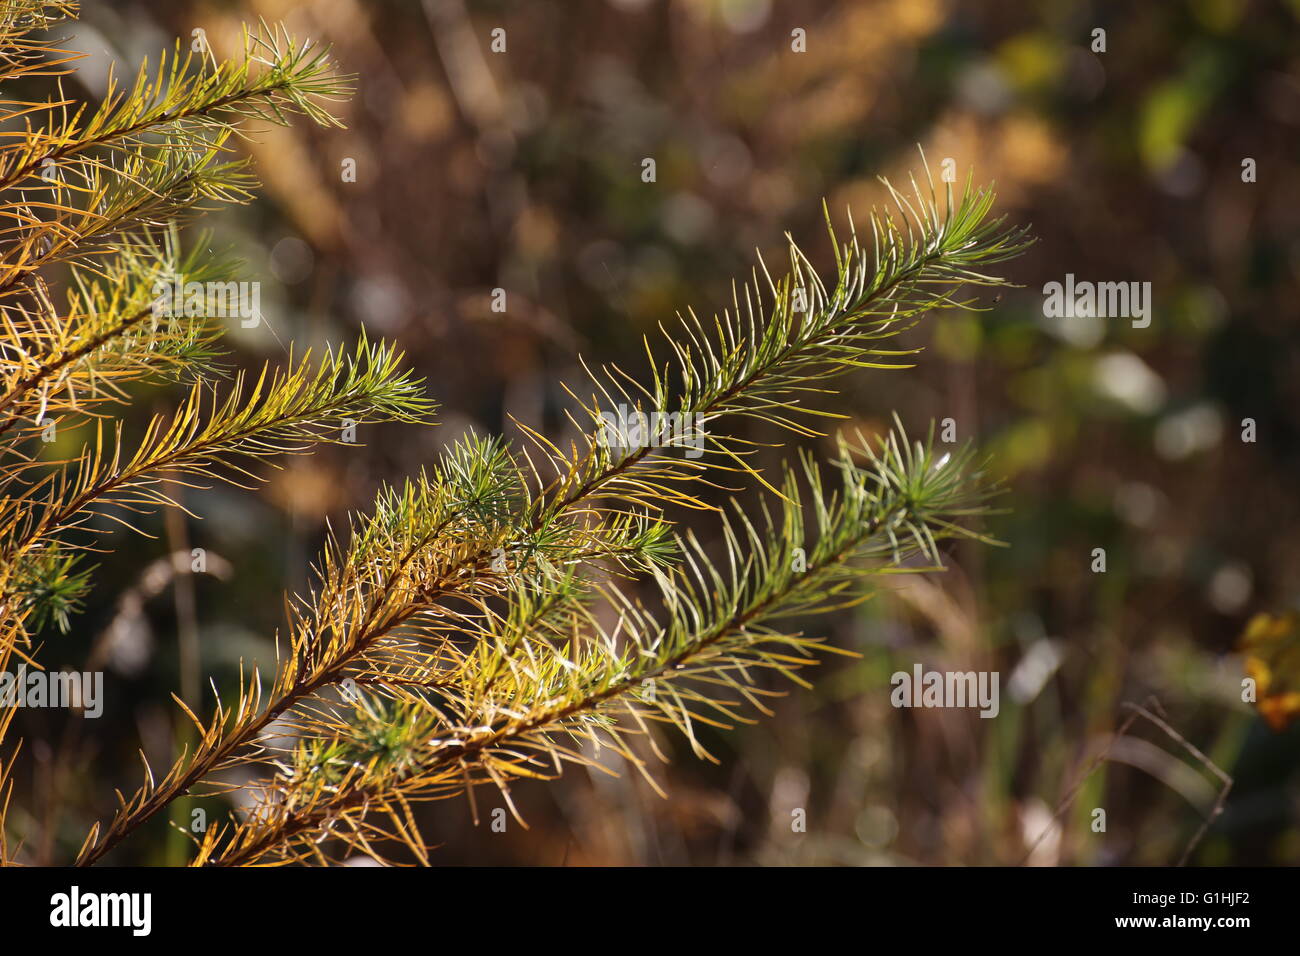 Detail of the twig of a spruce tree in autumn. Stock Photo